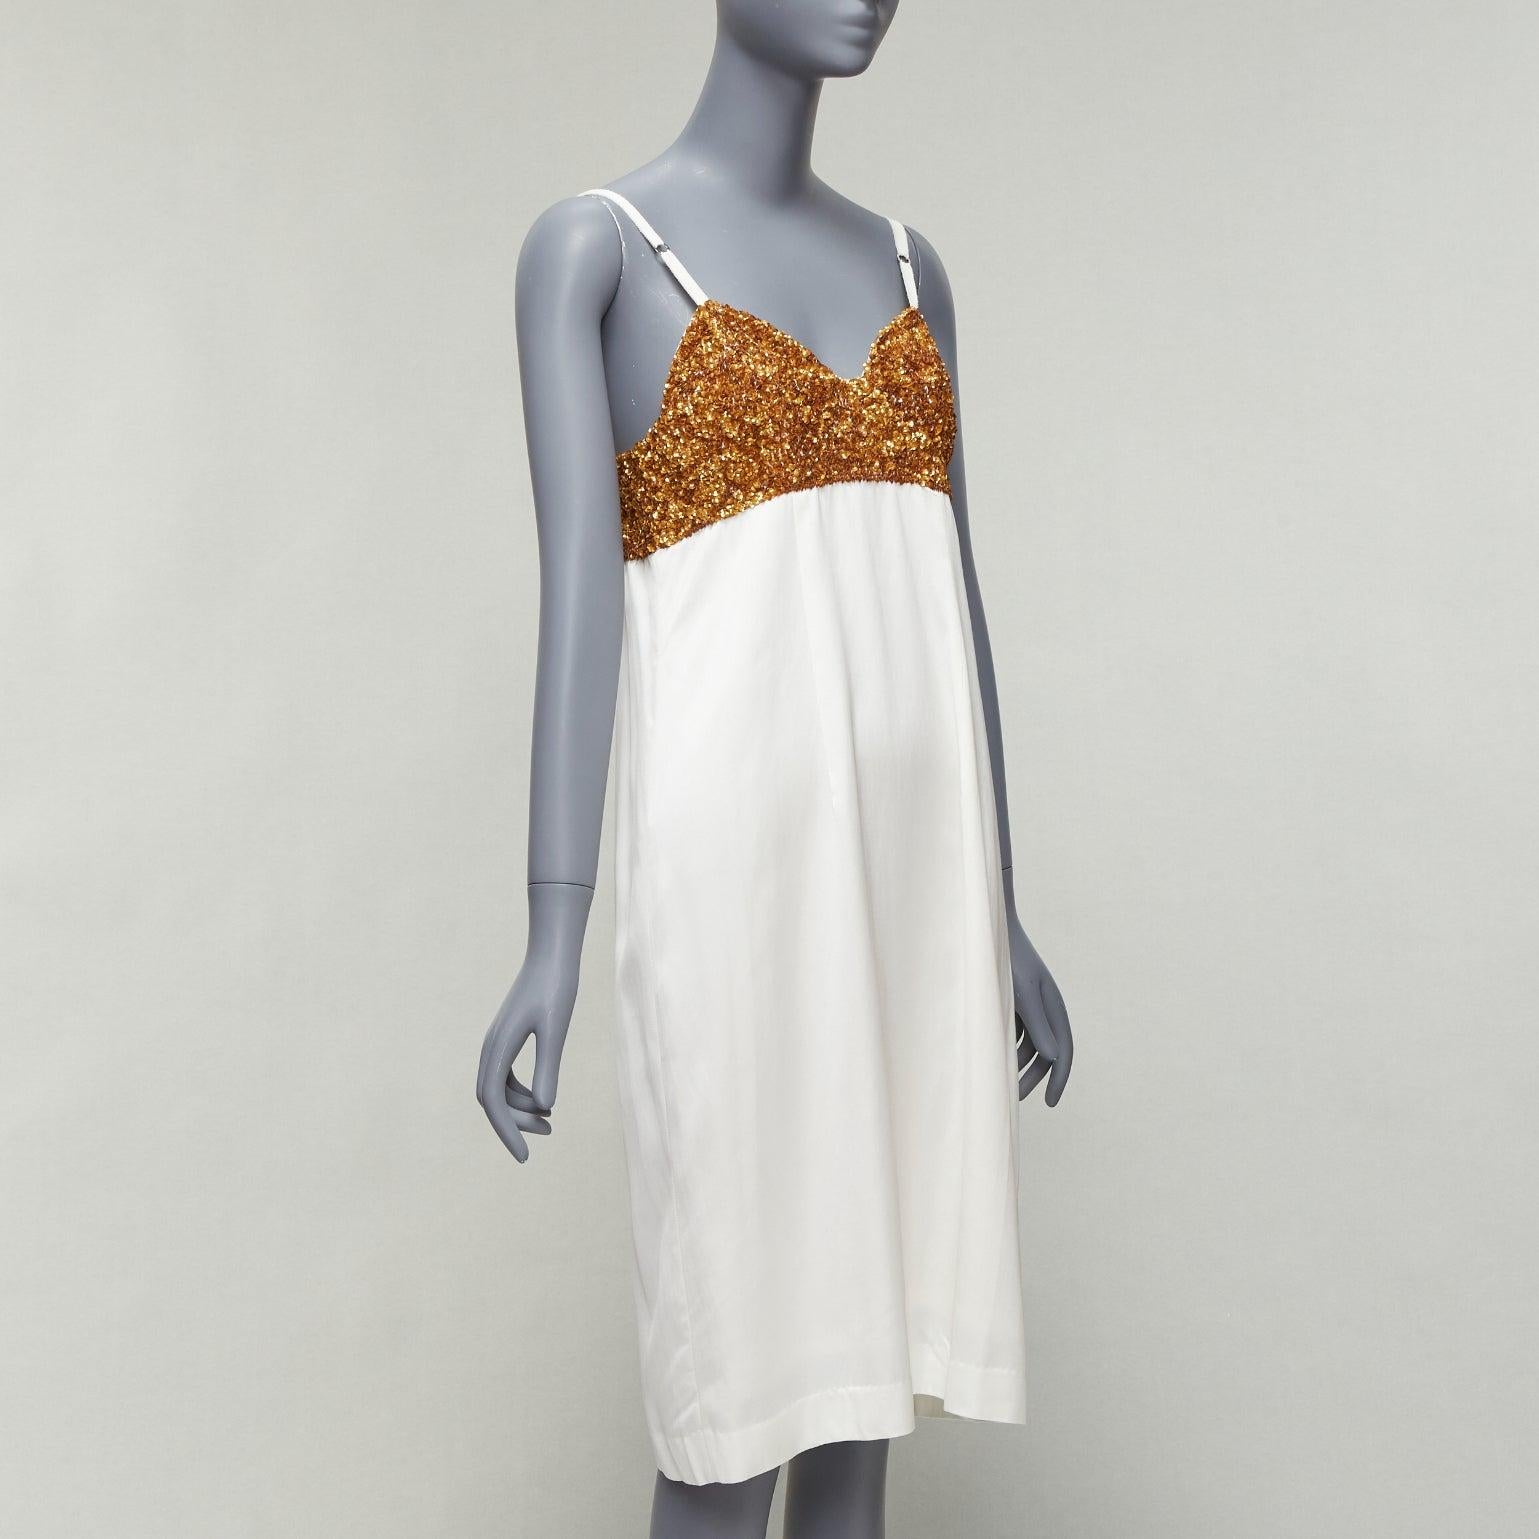 DRIES VAN NOTEN Runway gold sequins bust white satin strappy slip dress FR36 S
Reference: CELG/A00276
Brand: Dries Van Noten
Collection: Runway
Material: Viscose, Cotton
Color: Gold, Cream
Pattern: Sequins
Closure: Zip
Lining: Cream Fabric
Extra